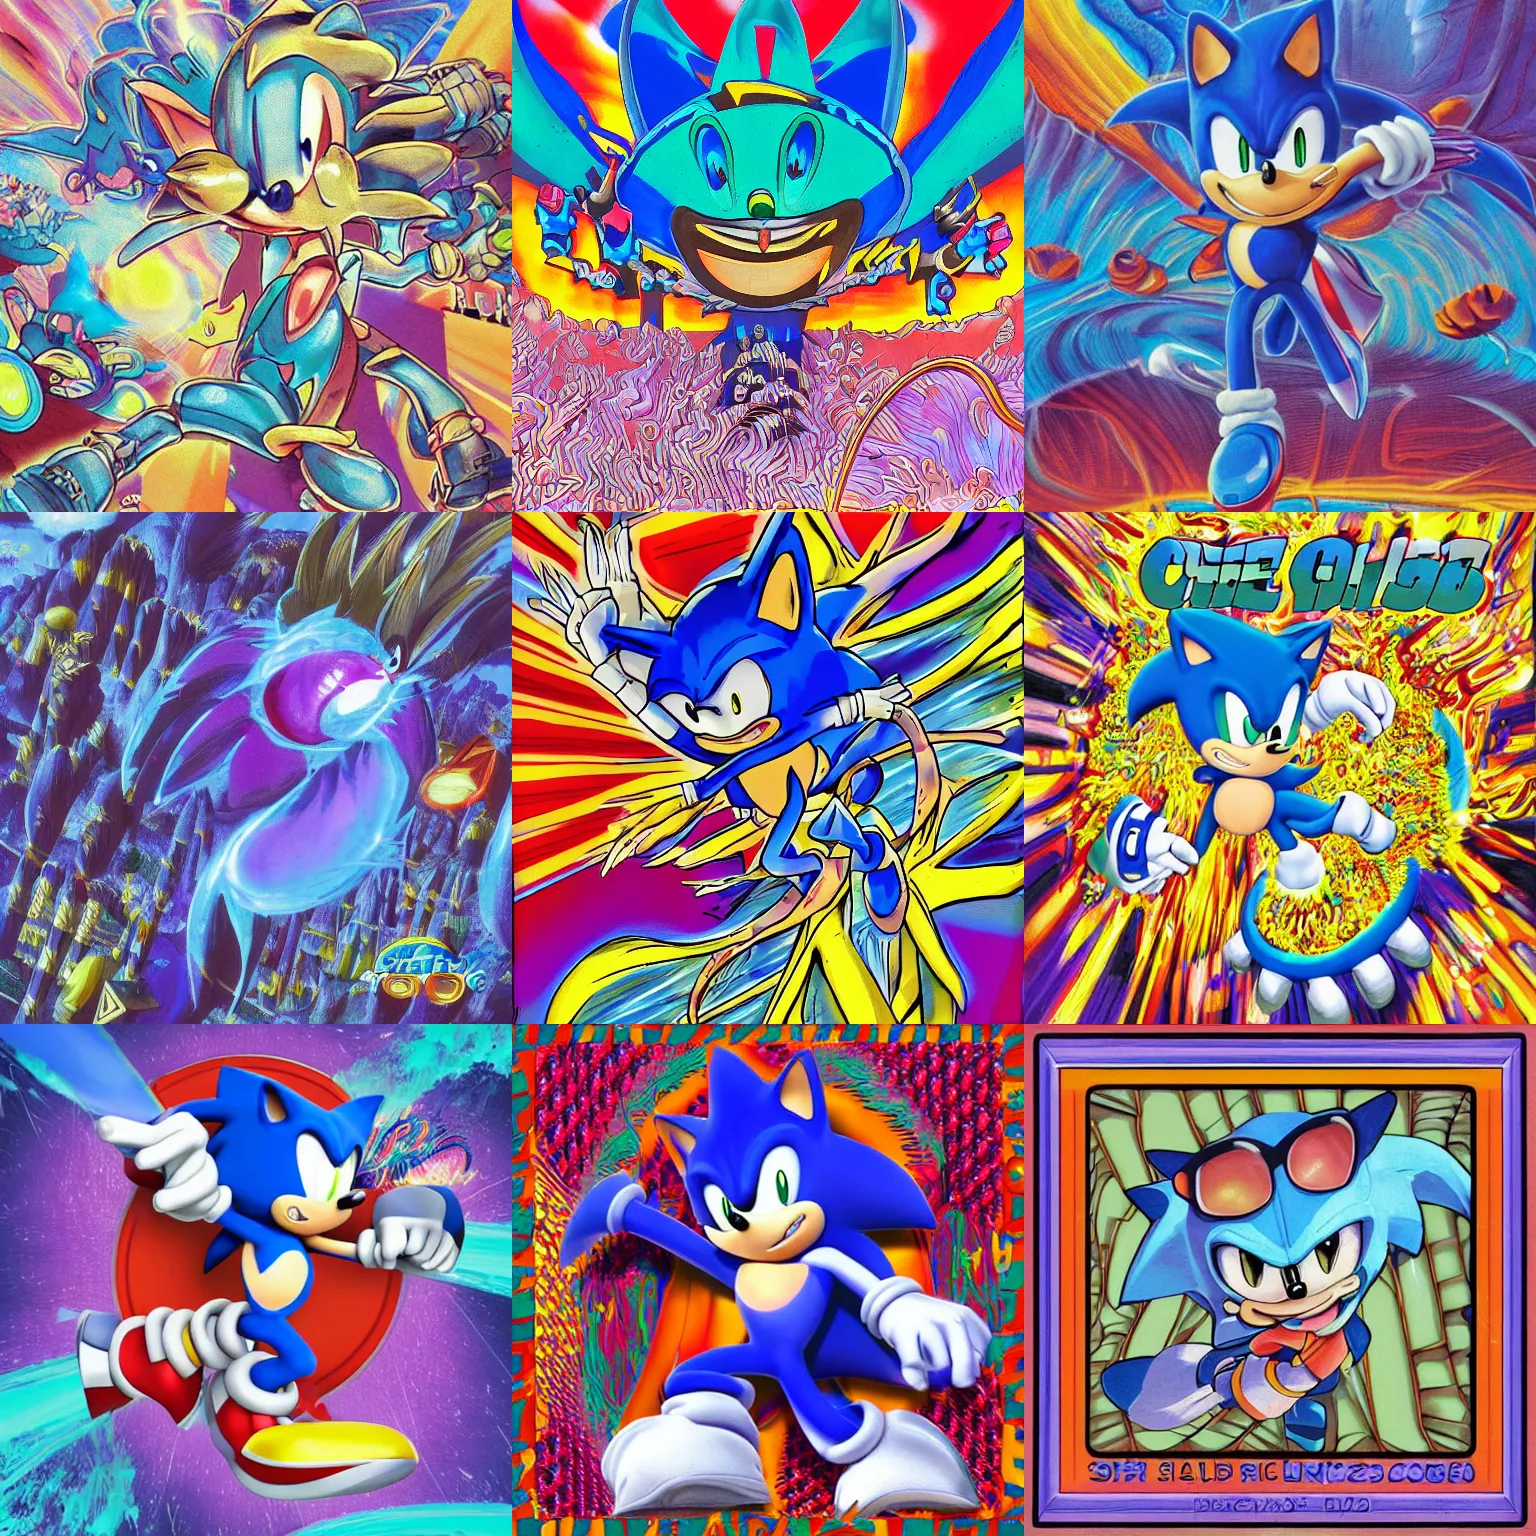 Prompt: sonic the hedgehog in a surreal, sharp, detailed professional, high quality airbrush art MGMT album cover of a liquid dissolving LSD DMT blue sonic the hedgehog surfing through cyberspace, purple checkerboard background, 1990s 1992 Sega Genesis video game album cover